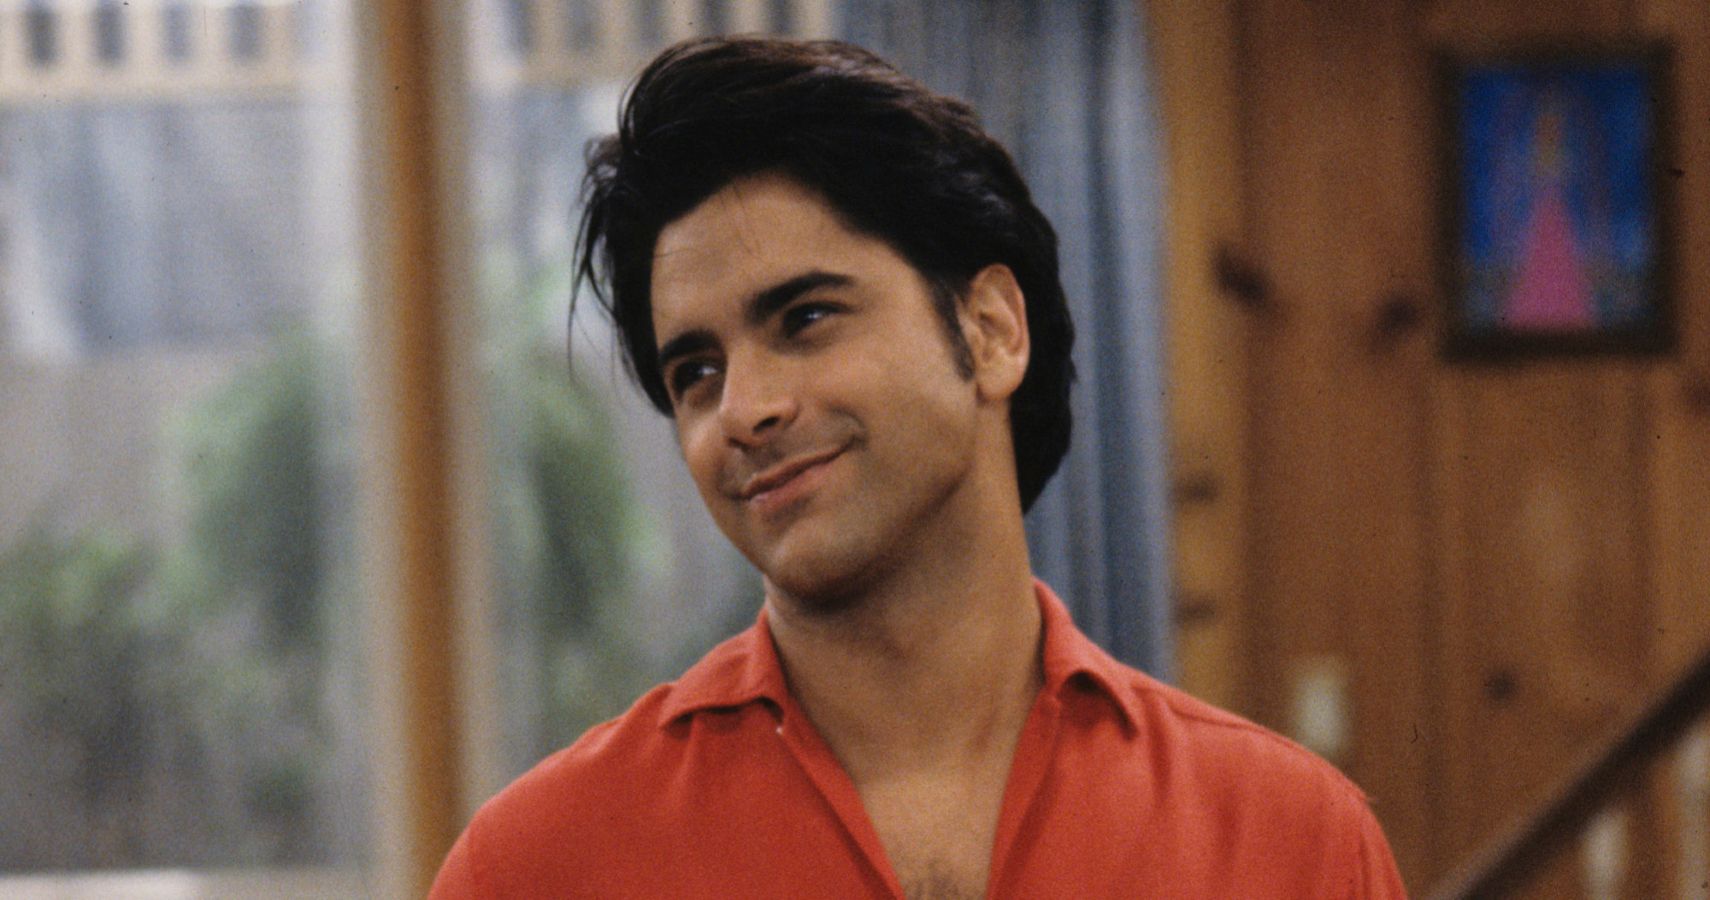 uncle jesse full house have mercy